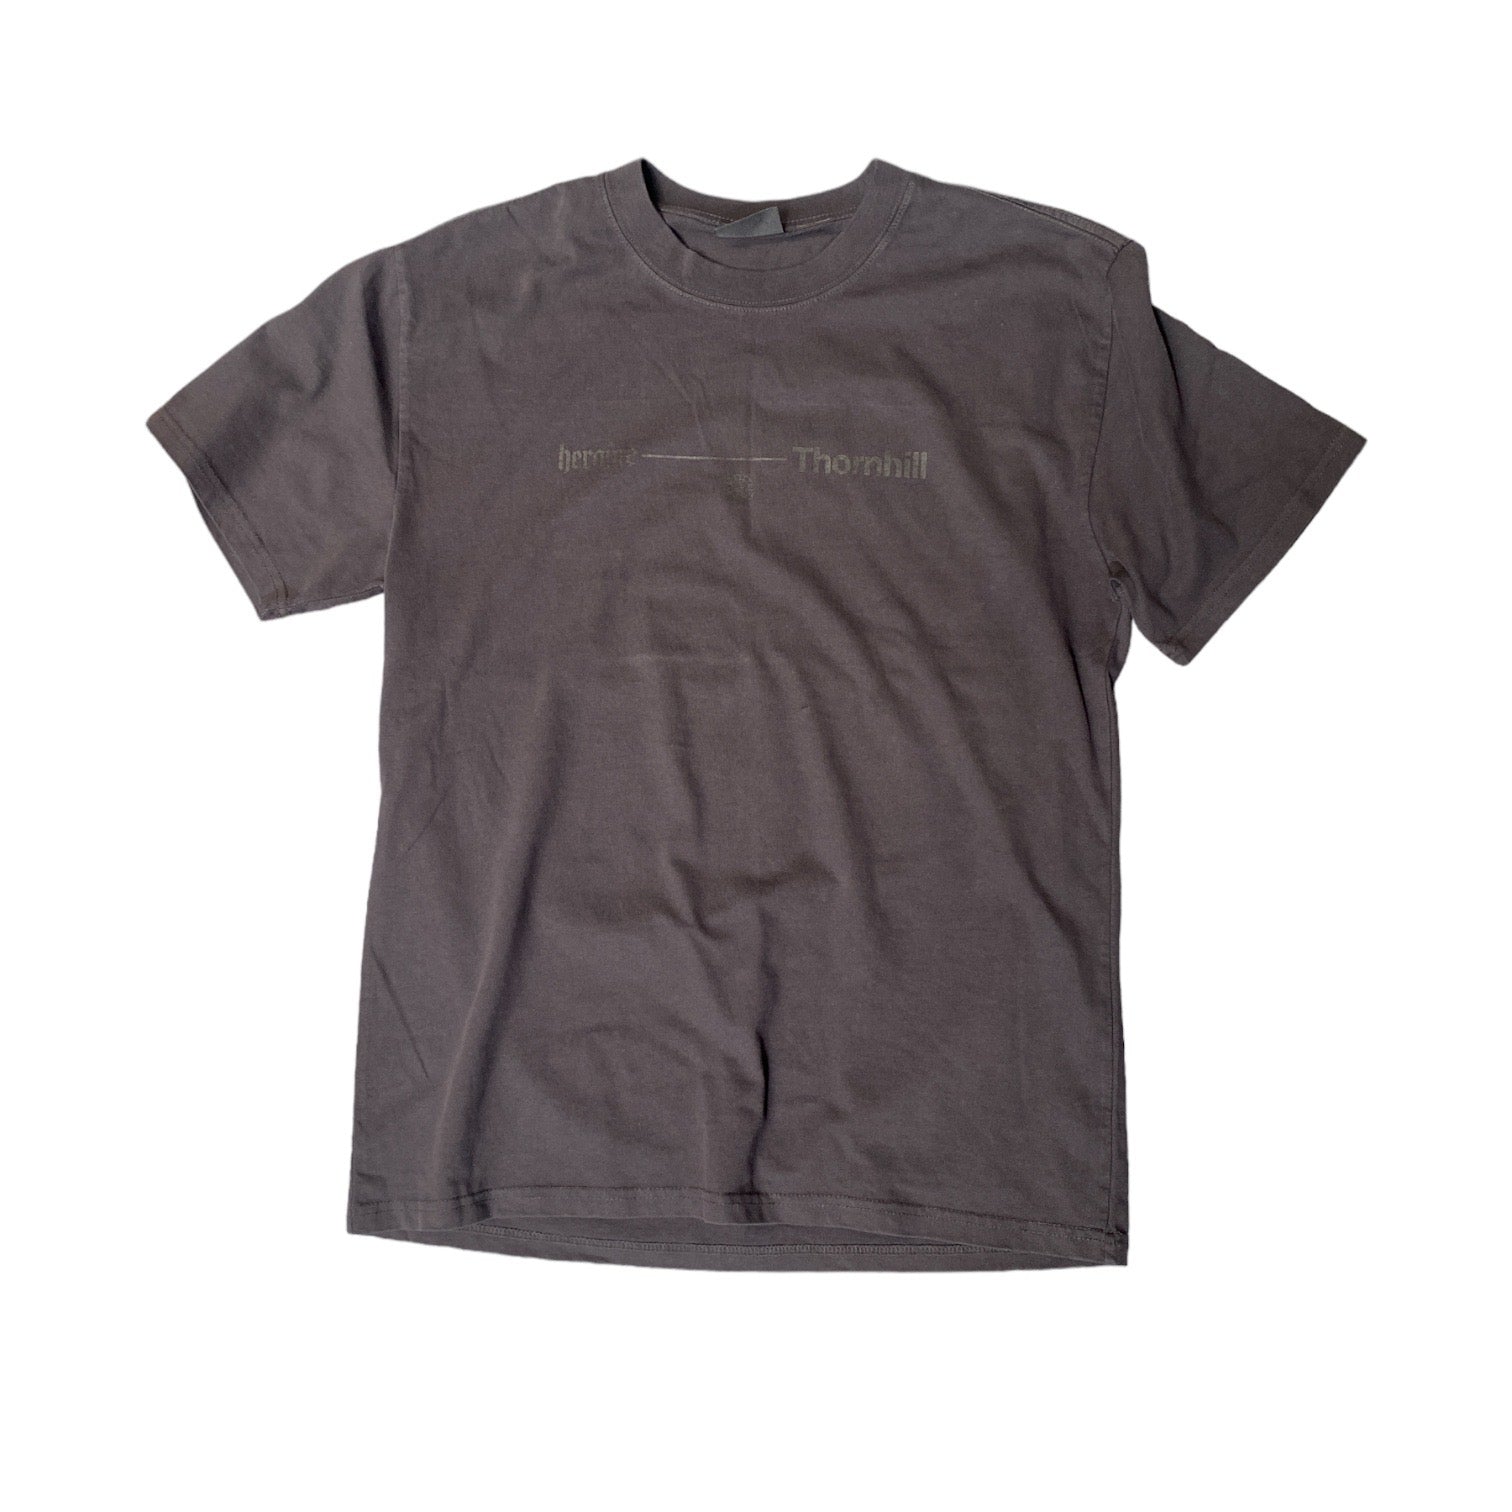 Tombstone Tee – Thornhill